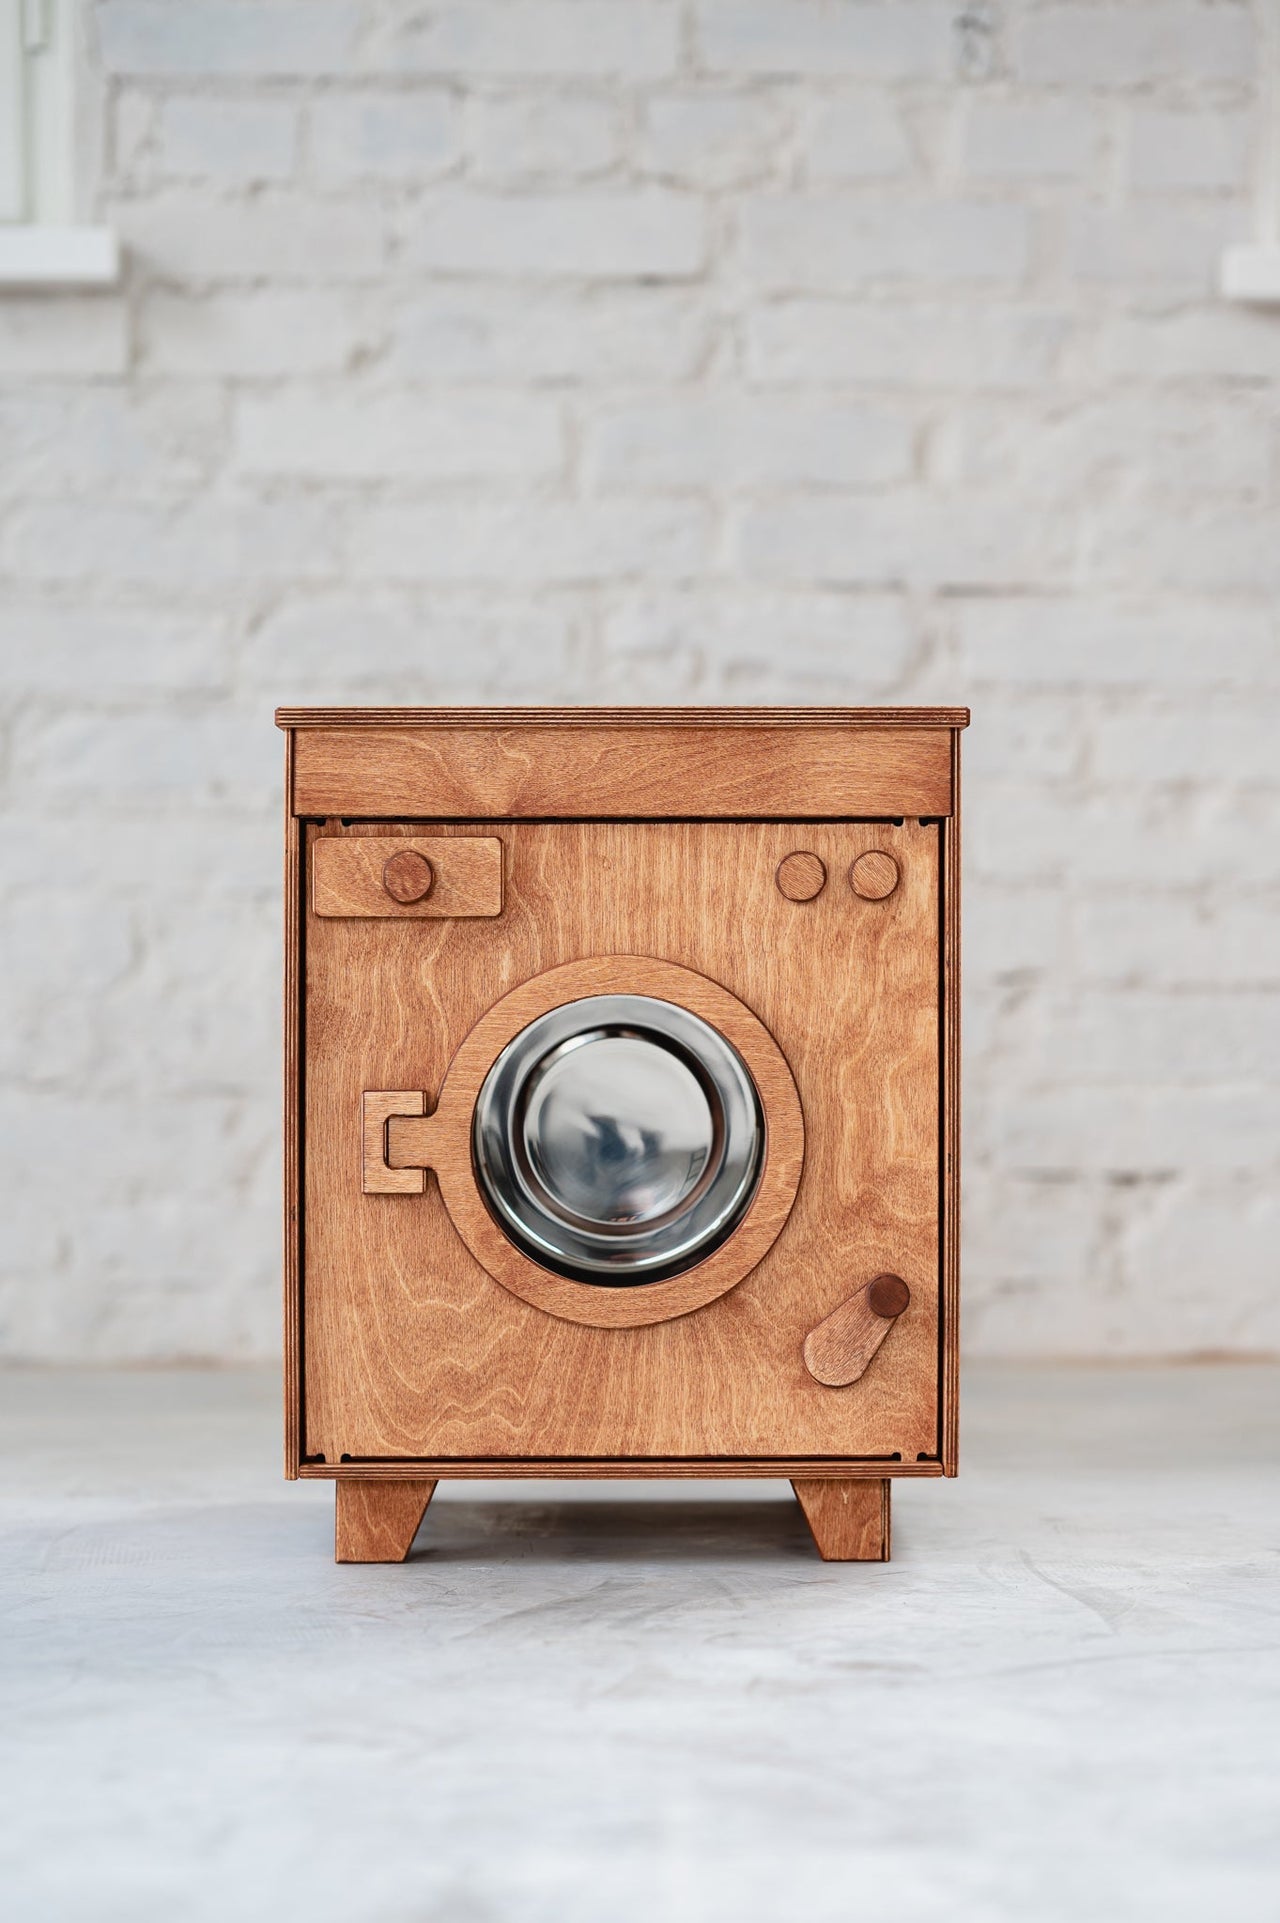 Wooden Washing Machine - Mustard - MIDMINI - Handcrafted wooden toys for generations.